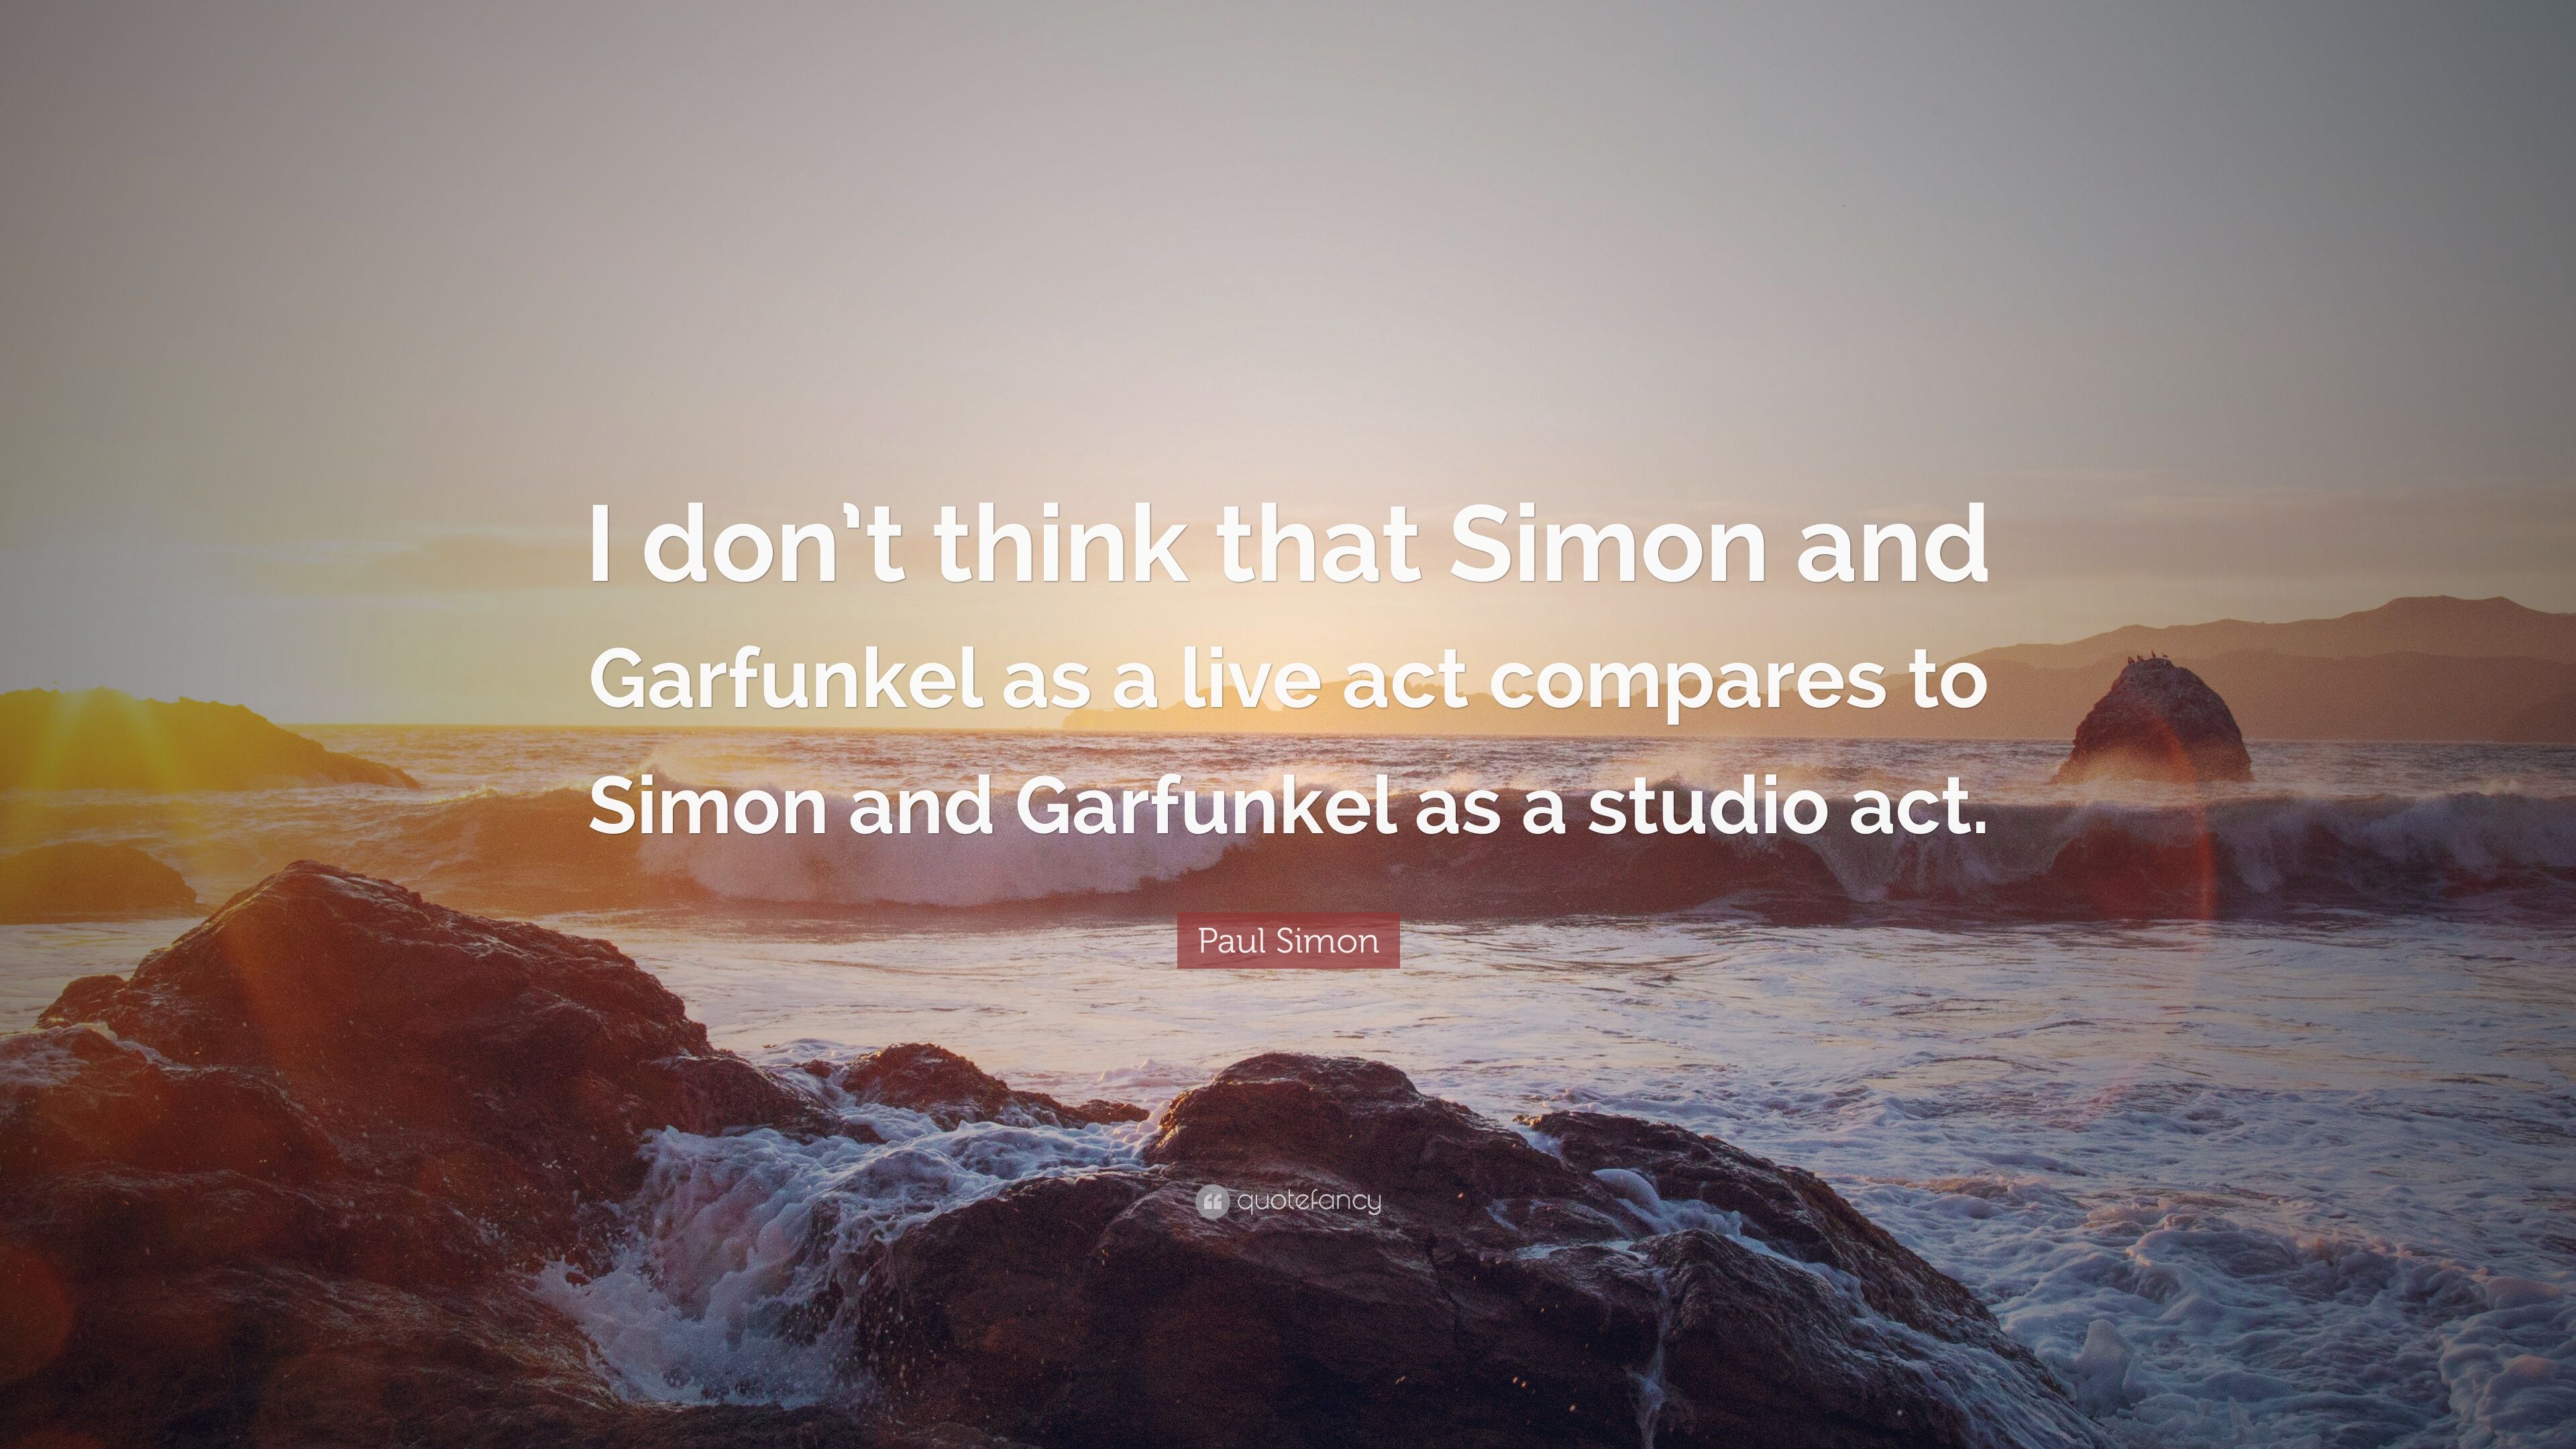 Paul Simon Quote: “I don't think that Simon and Garfunkel as a